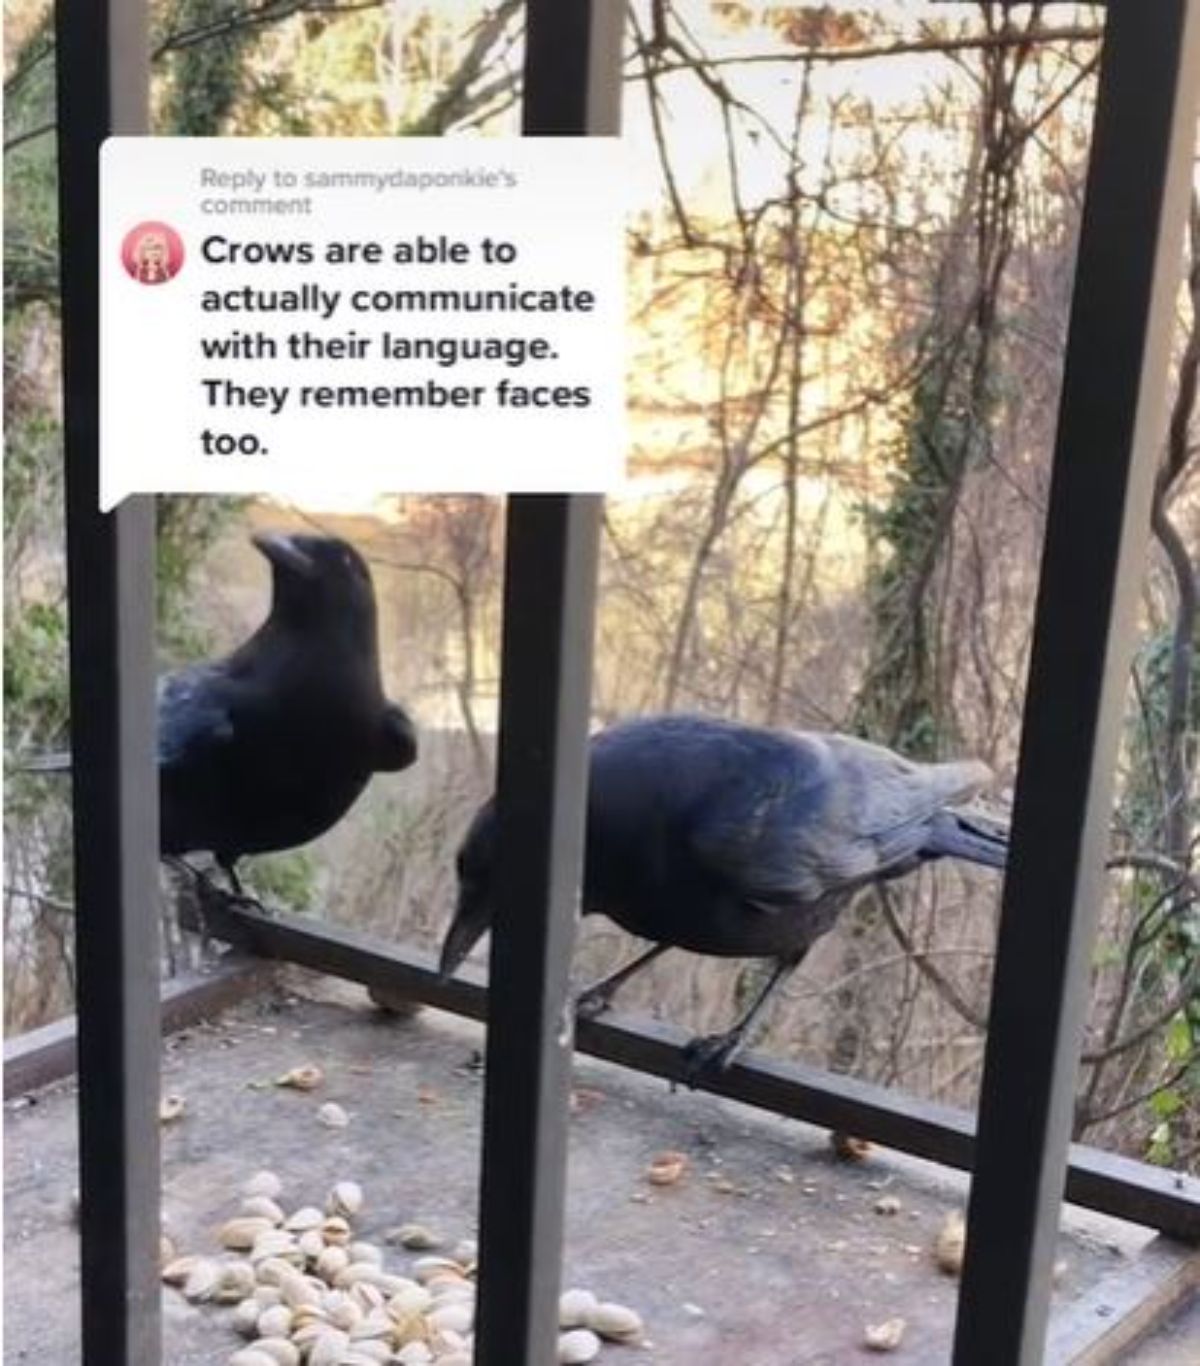 2 crows eating pistachios with a comment saying crows communicate in their language and can remember faces